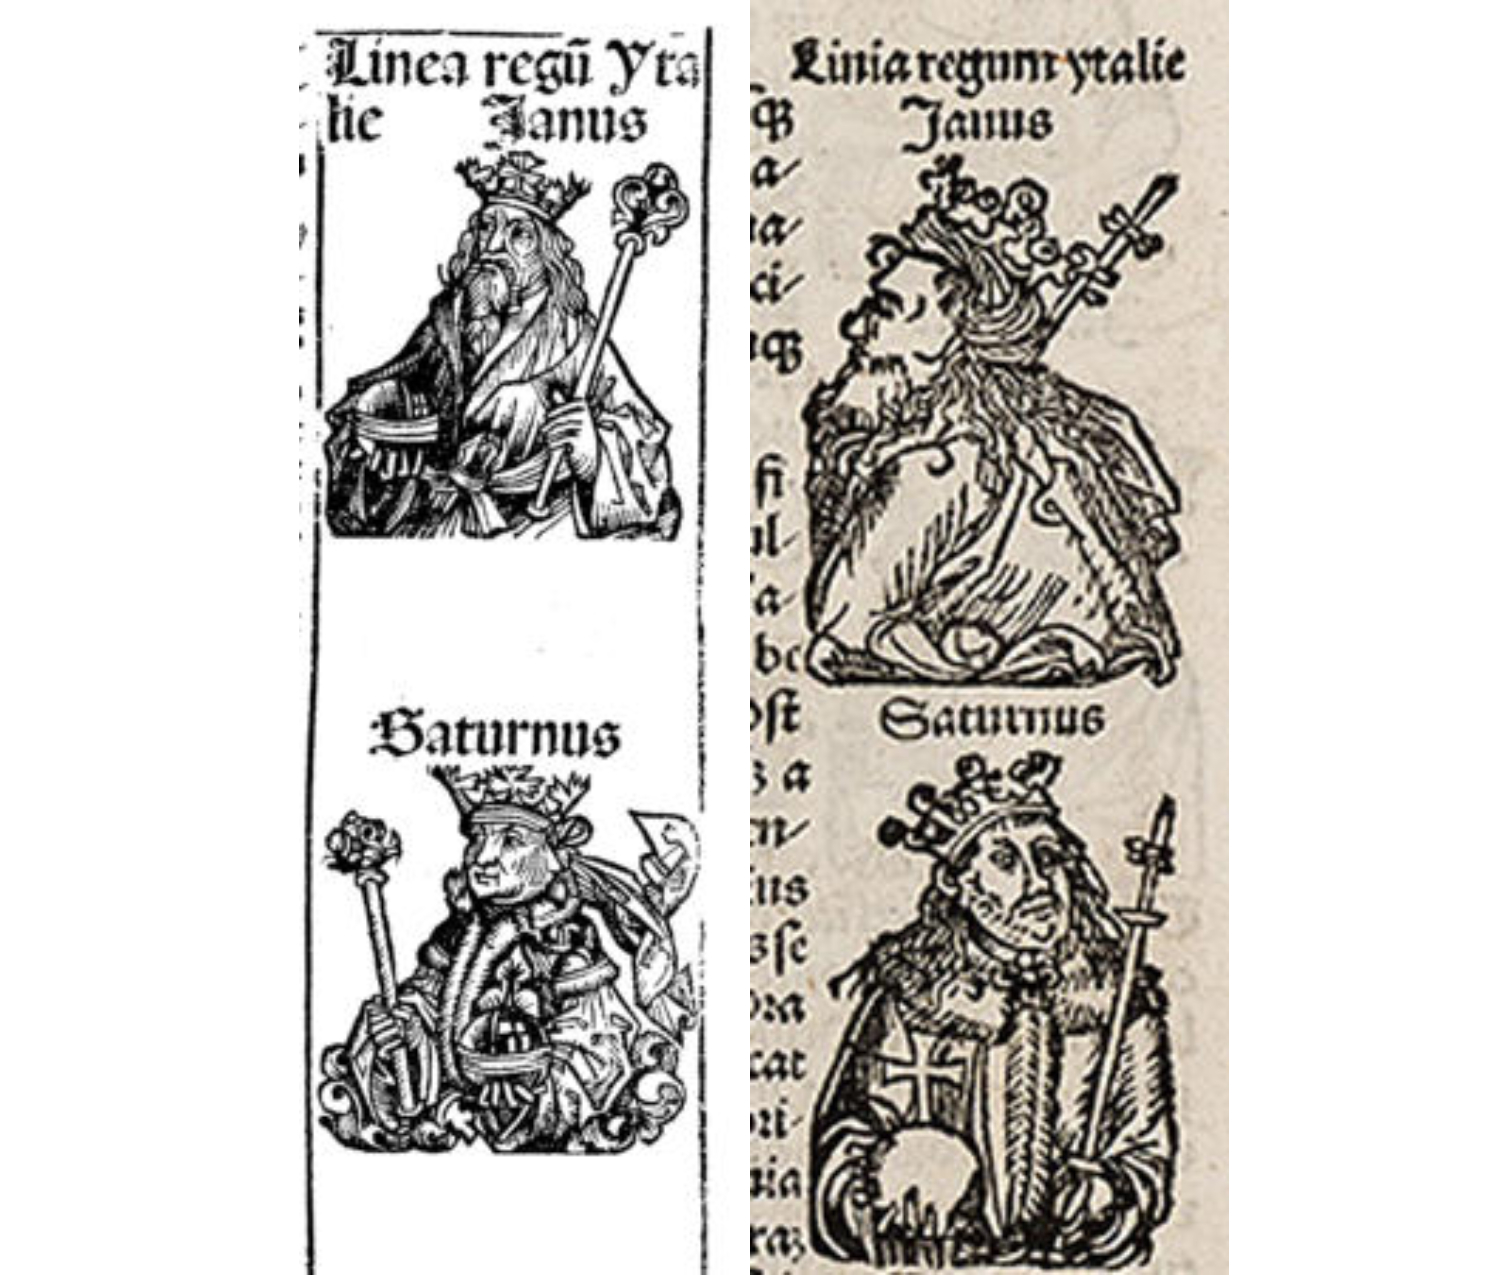 Two side by side images of illustrations of kings Janus and Saturnu with Latin headings.